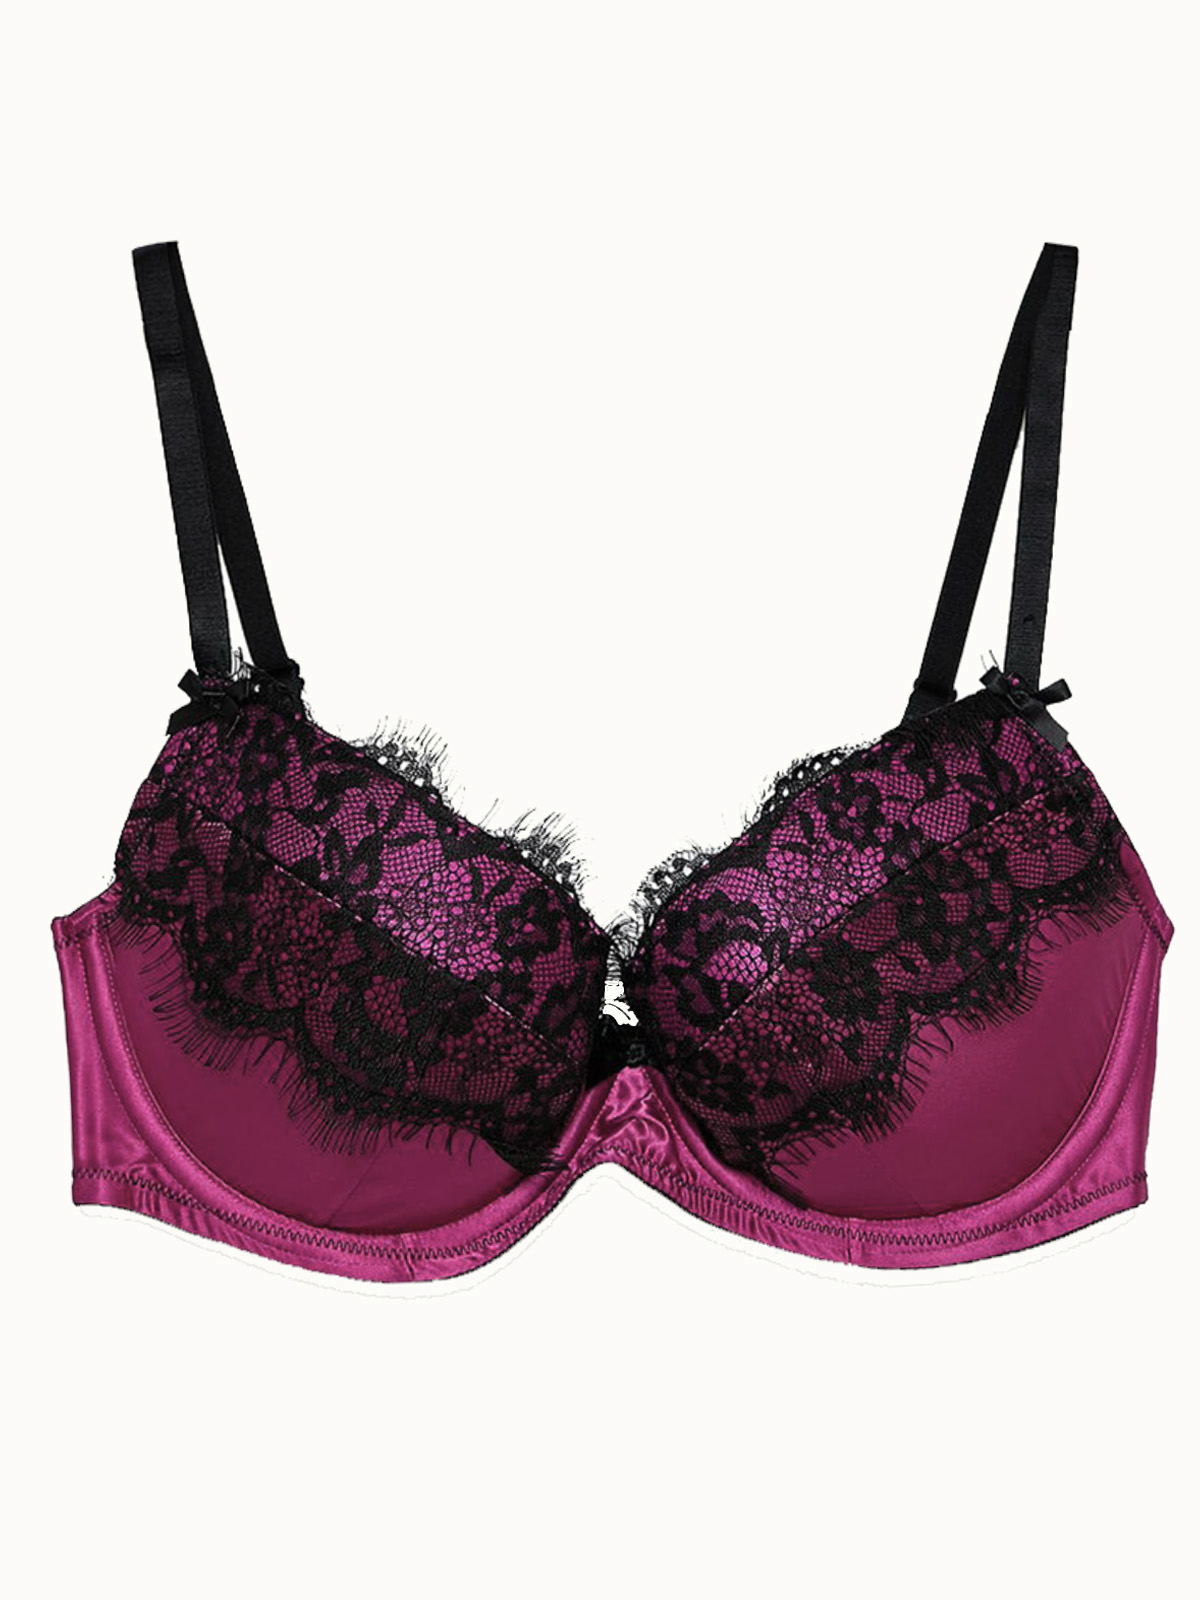 Ann Summers by AlexP - 🎀 ALEECE 🎀 This longline bra is made from